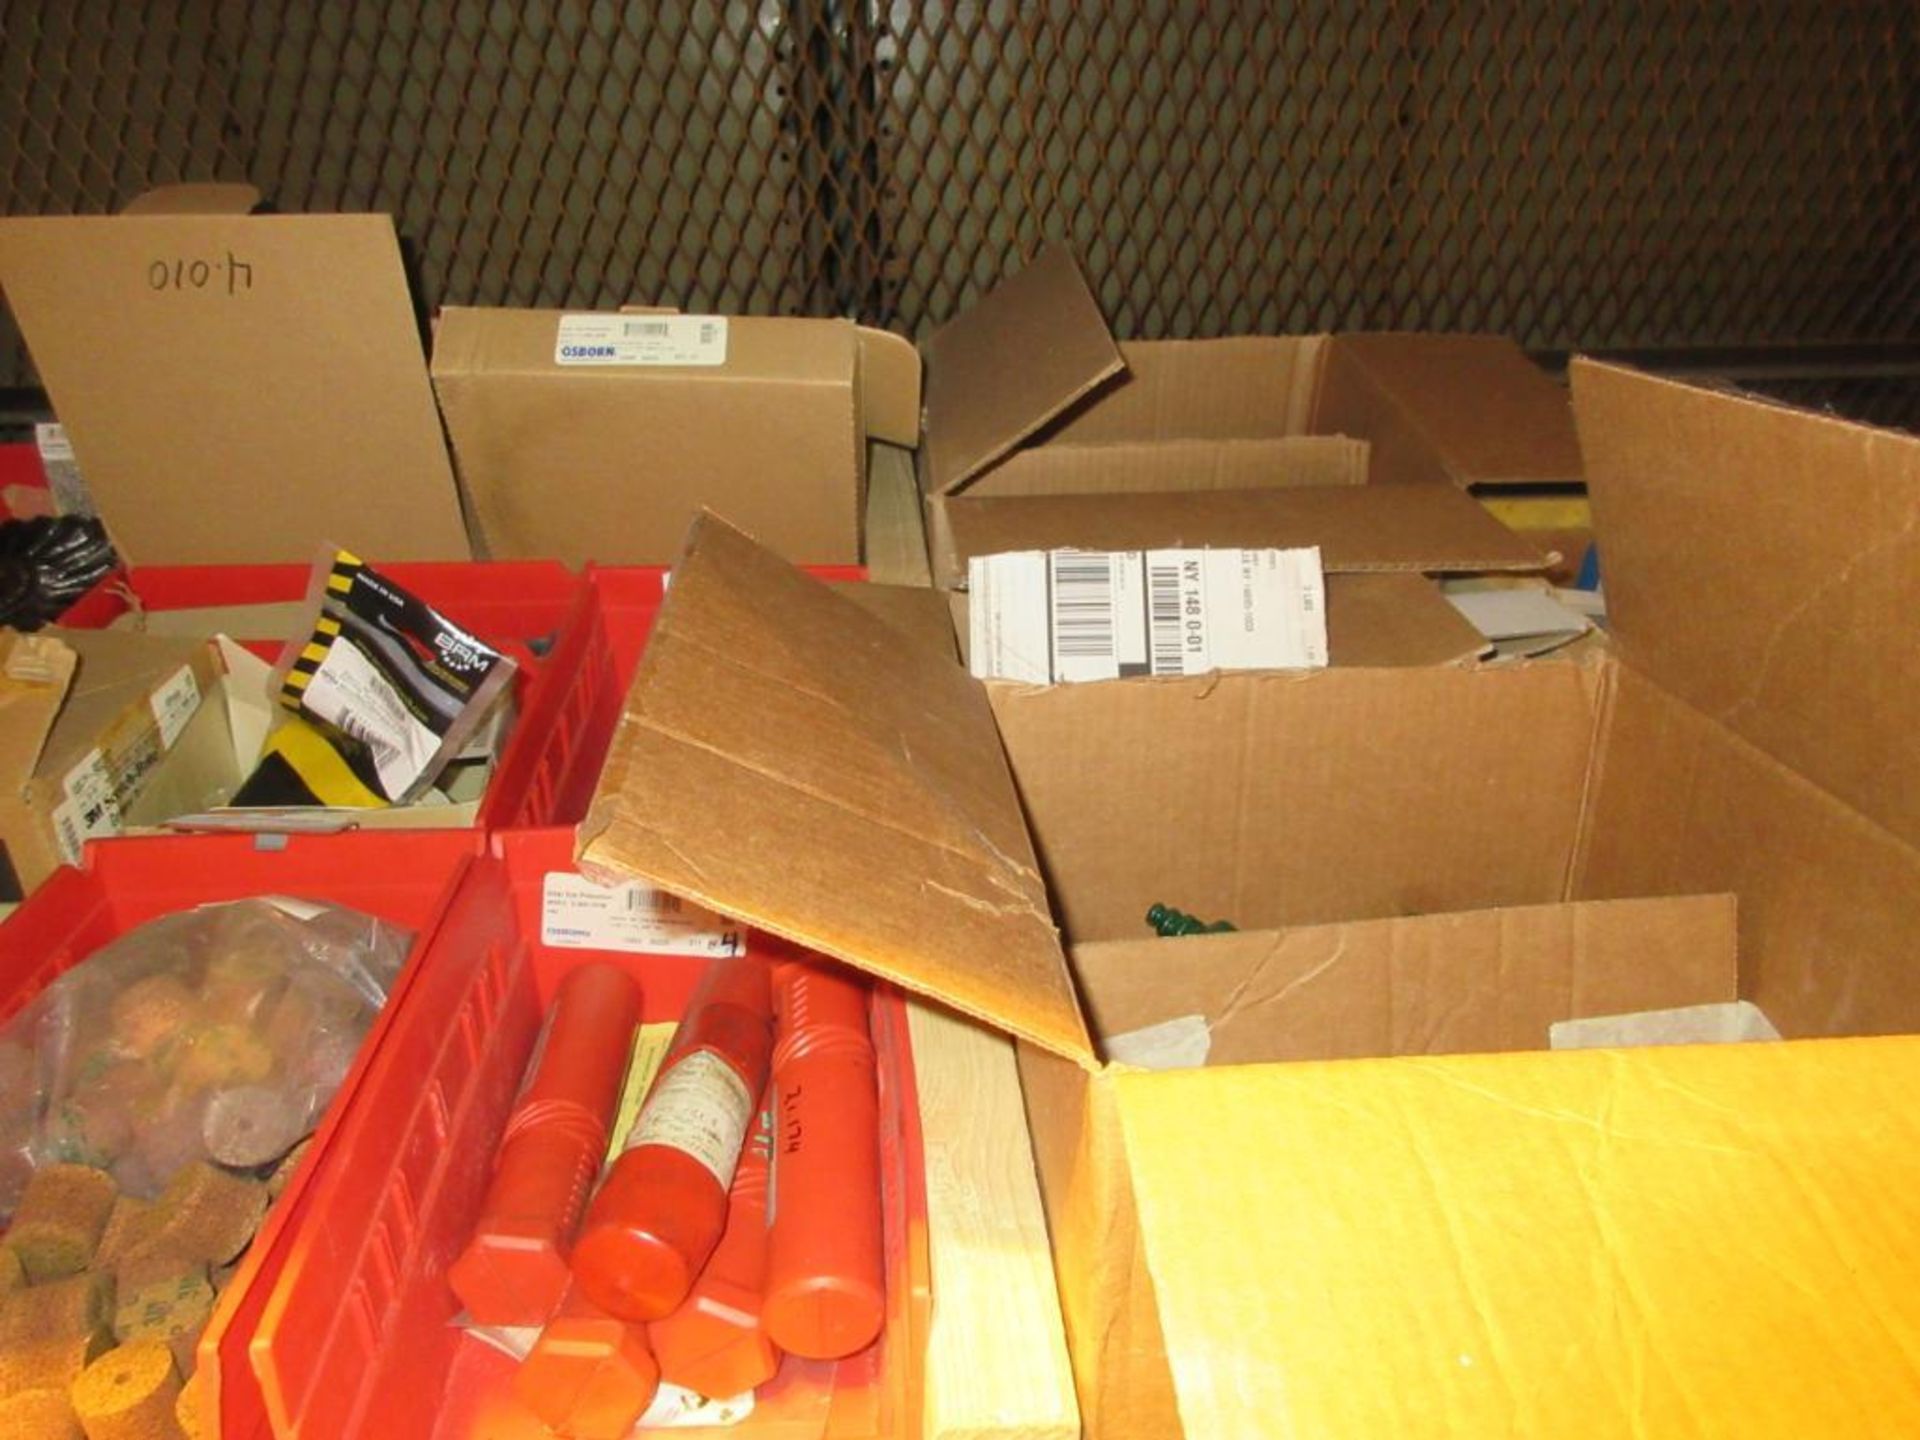 CONTENTS OF (22) SECTIONS PALLET RACK: ASSORTED ABRASIVES, SUNNEN STONES, TOOL BITS, DOVETAIL CUTTER - Image 12 of 43